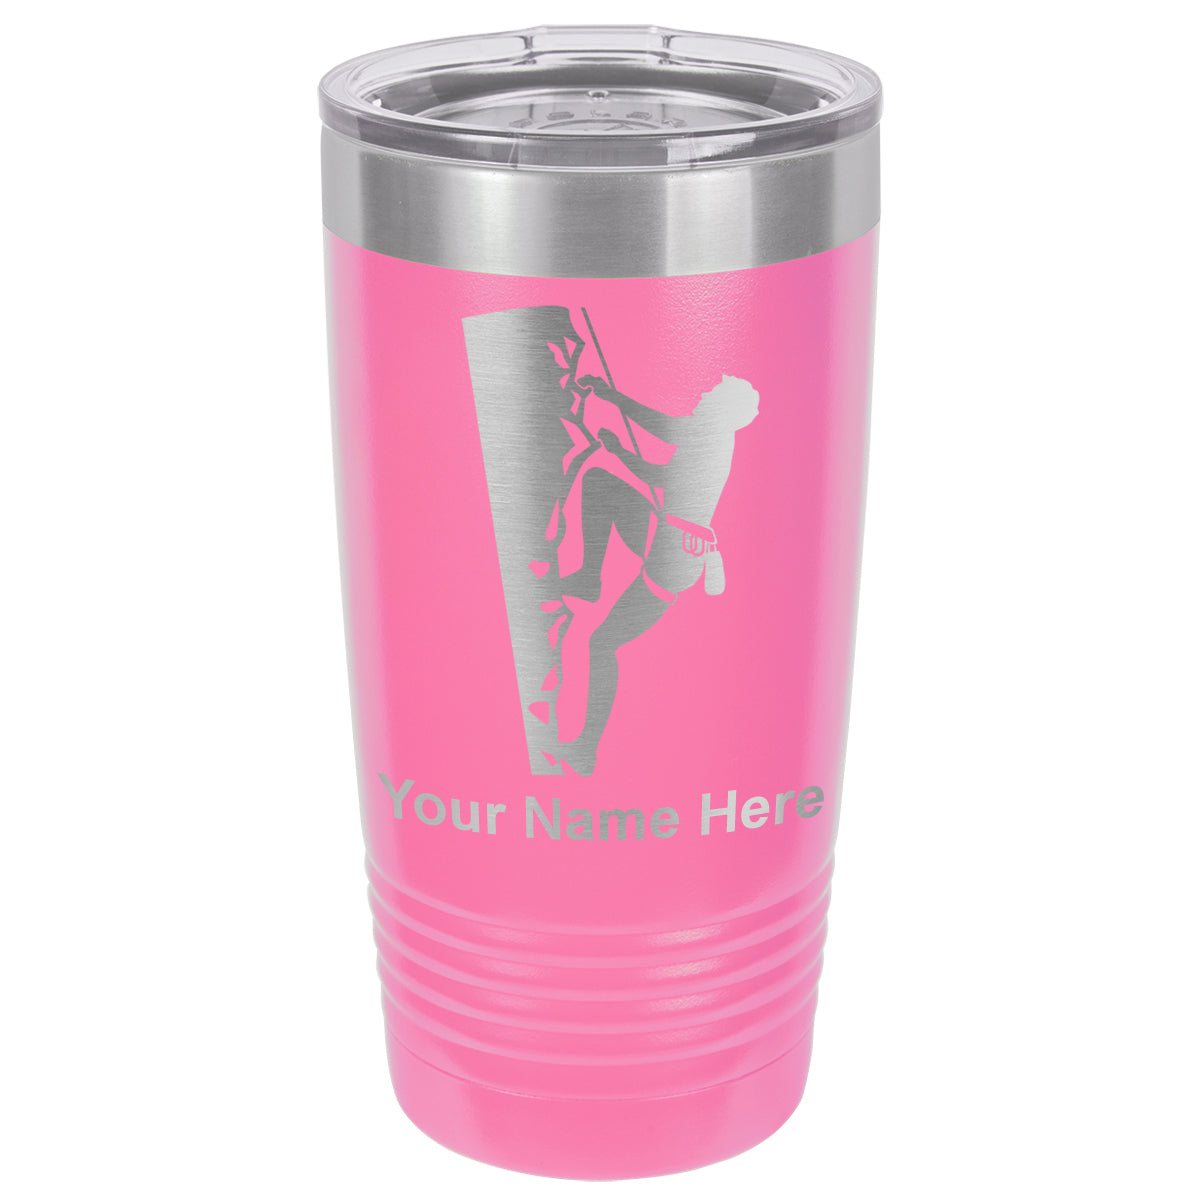 20oz Vacuum Insulated Tumbler Mug, Rock Climber, Personalized Engraving Included